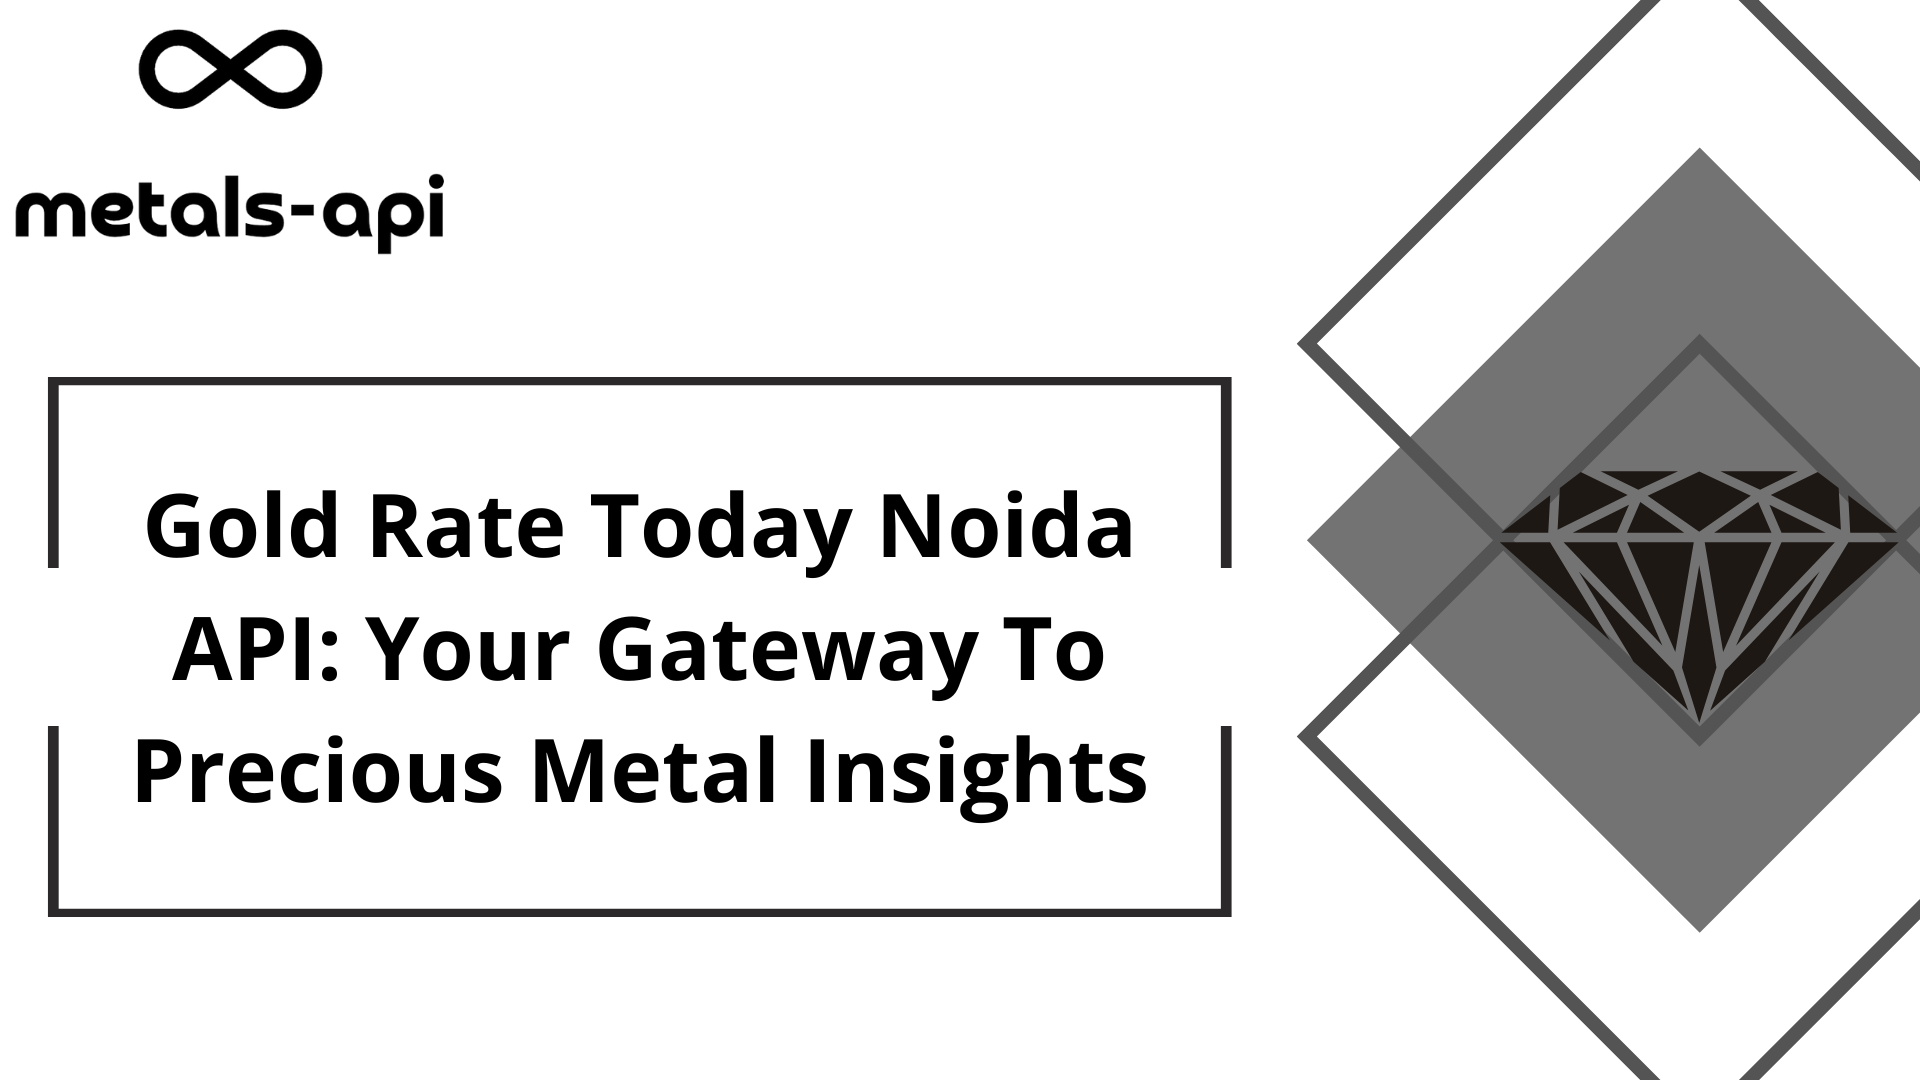 Gold Rate Today Noida API: Your Gateway To Precious Metal Insights